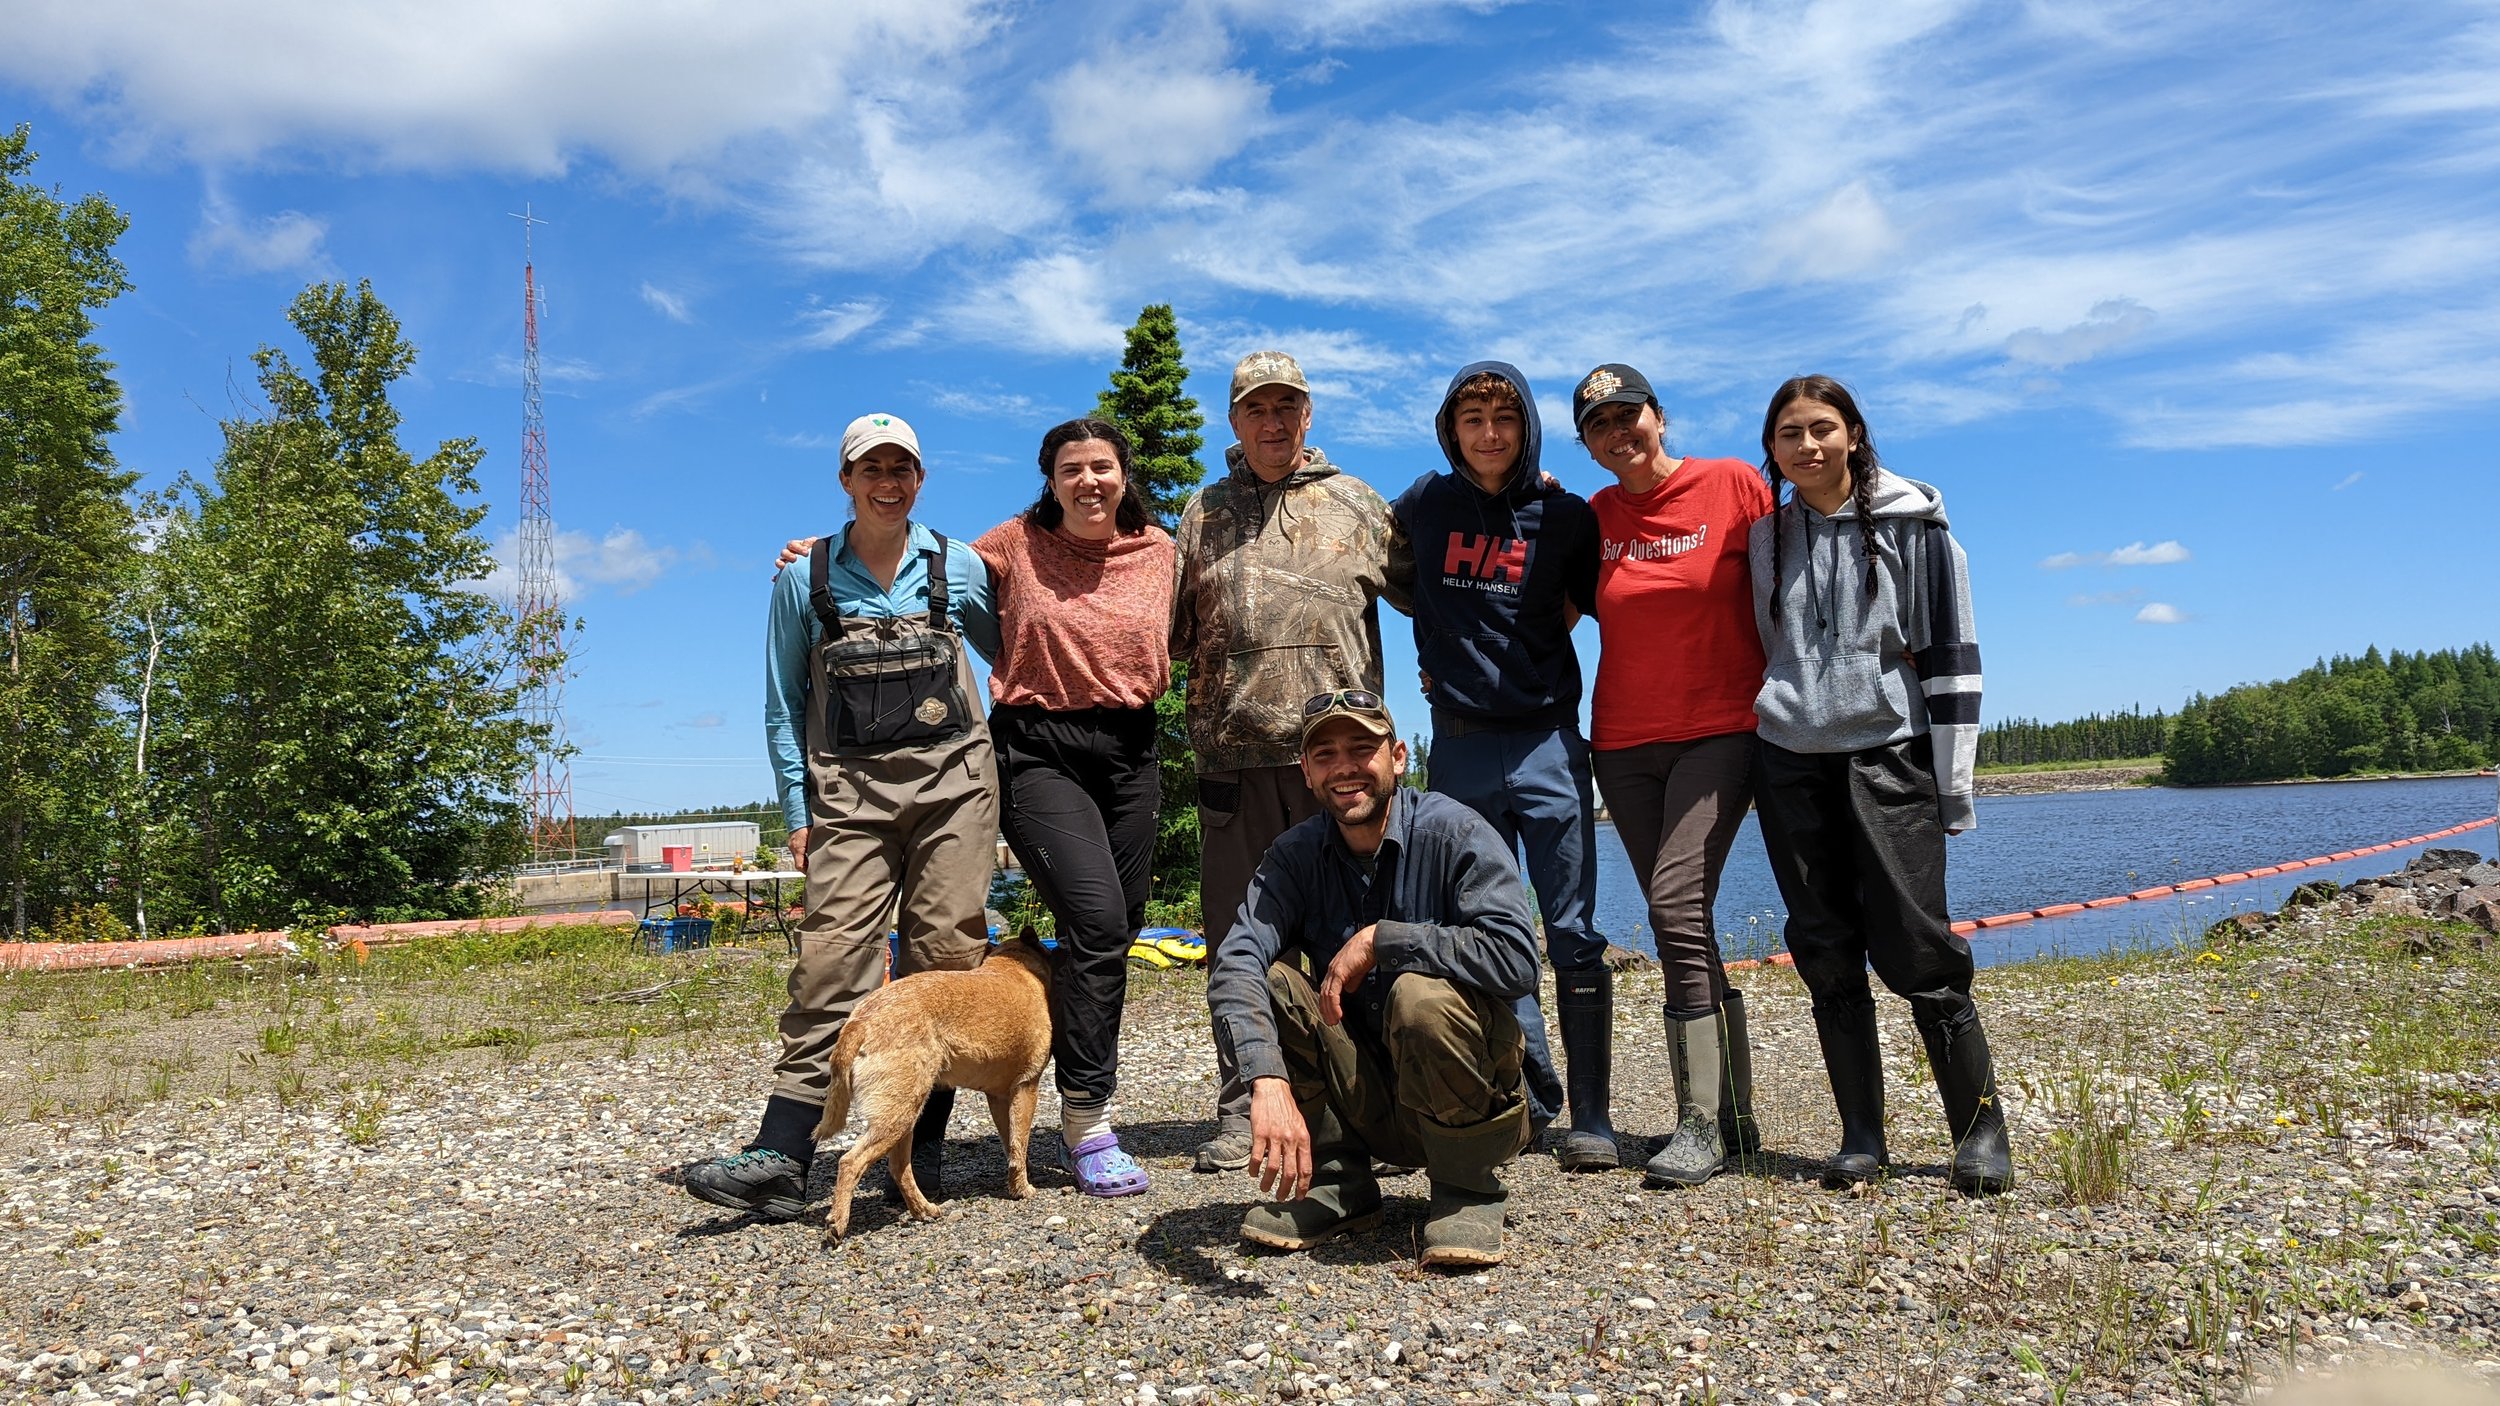 The Mattagami River Field Crew for 2022! From left to right, top to bottom: Connie O'Connor, Claire Farrell, Roger Simard, Justin Simard, Jennifer Simard, Ocean Skye Phillips, JD, Jacob Seguin.